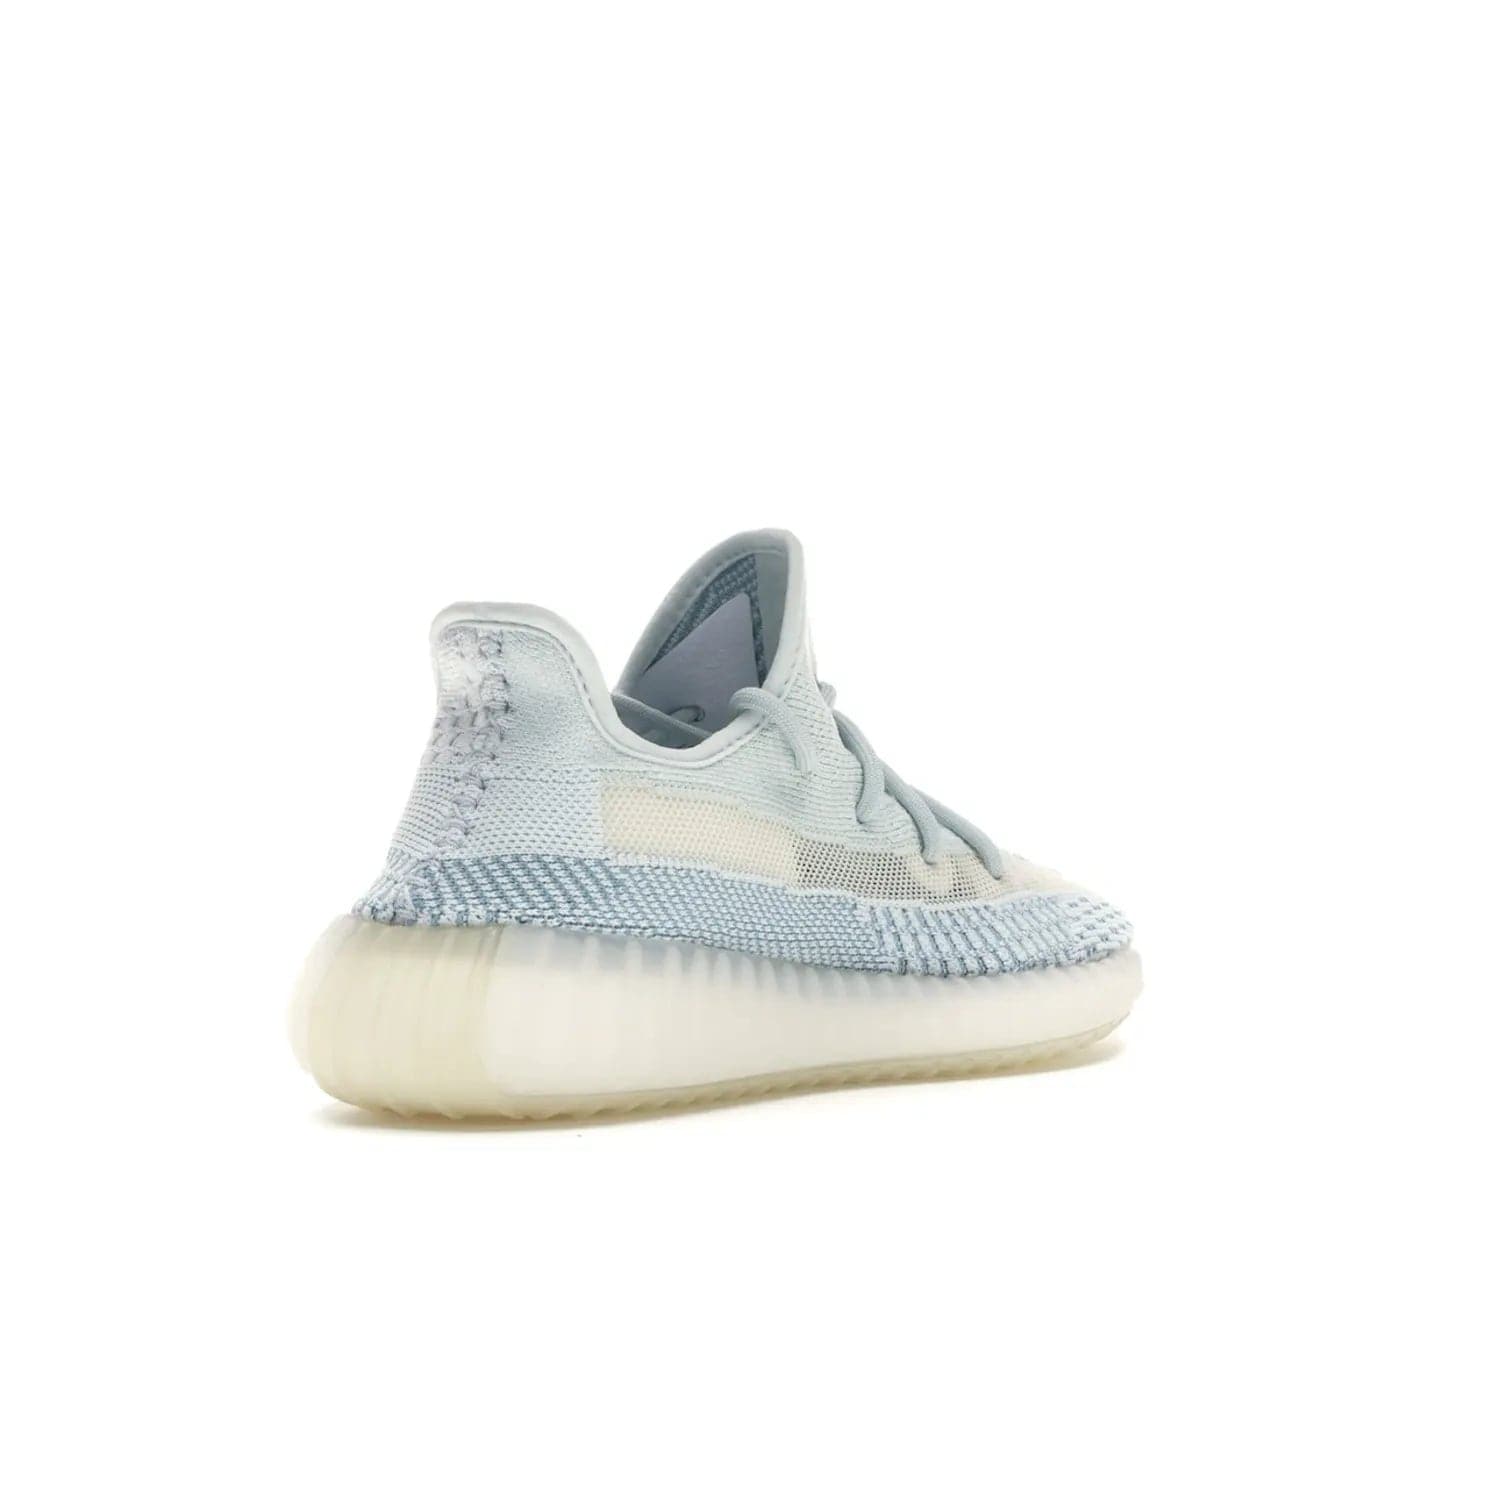 adidas Yeezy Boost 350 V2 Cloud White (Non-Reflective) - Image 32 - Only at www.BallersClubKickz.com - Uniquely designed adidas Yeezy Boost 350 V2 Cloud White (Non-Reflective) with a Primeknit upper in shades of cream and blue with a contrasting hard sole. A fashion-forward sneaker with a transparent strip and blue-and-white patterns.